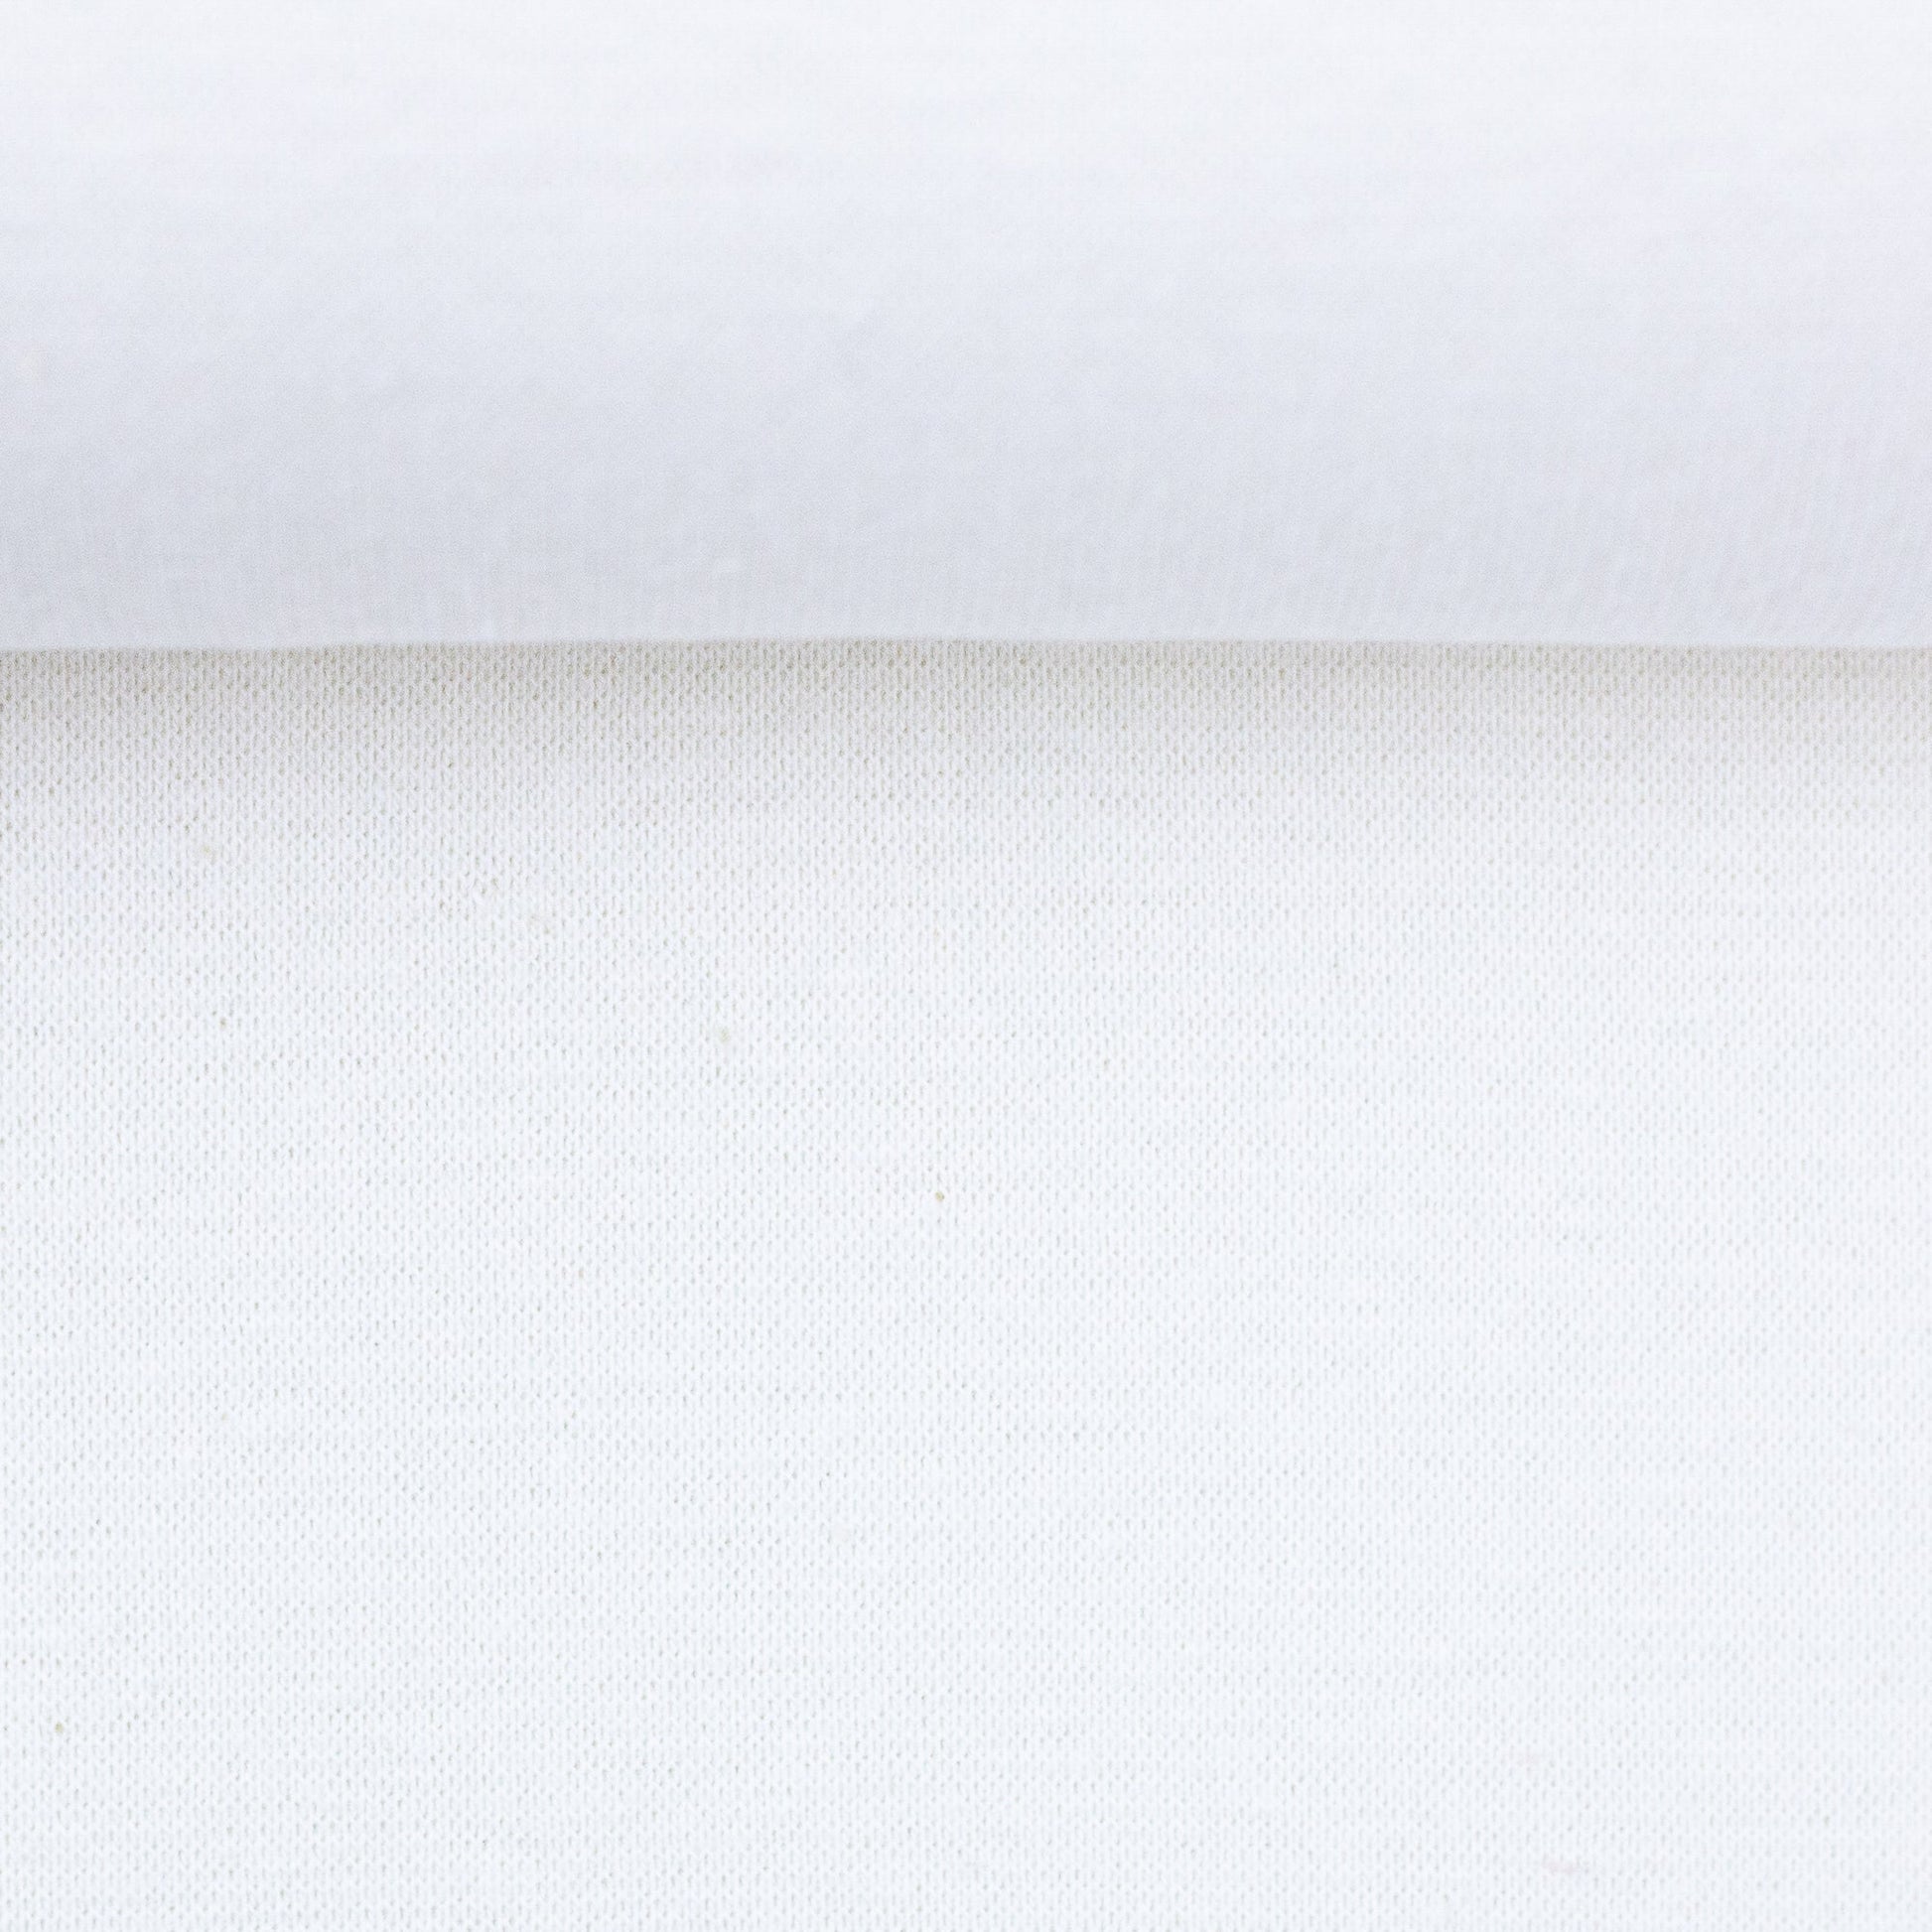 Swafing - Bright White -Snow White - Euro-ribbing - Jersey - French Terry - Fleeced French Terry - 0011 - Little Rhody Sewing Co.